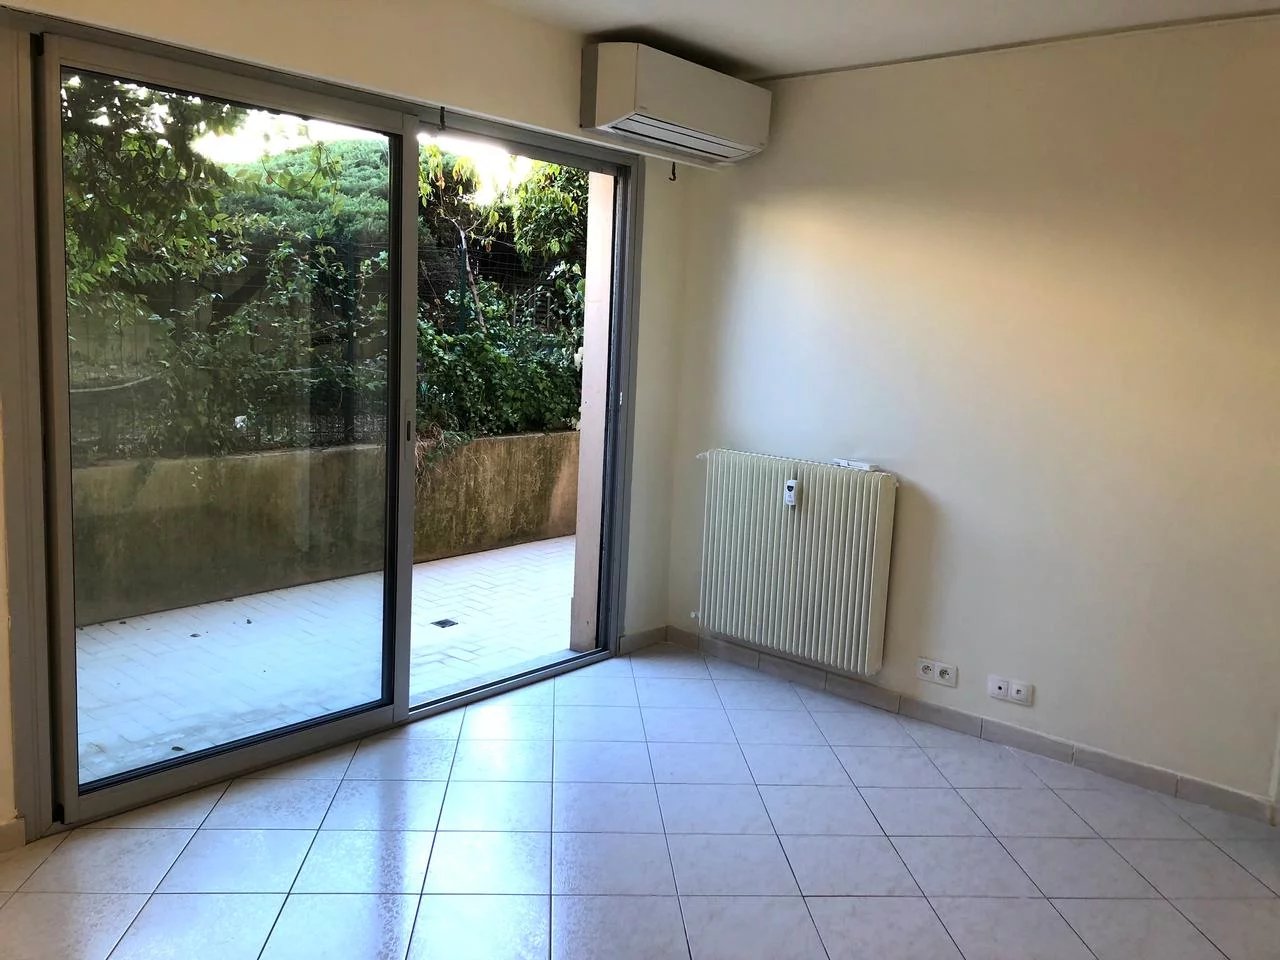 Appartement  2 Rooms 37.92m2  for sale   180 000 €